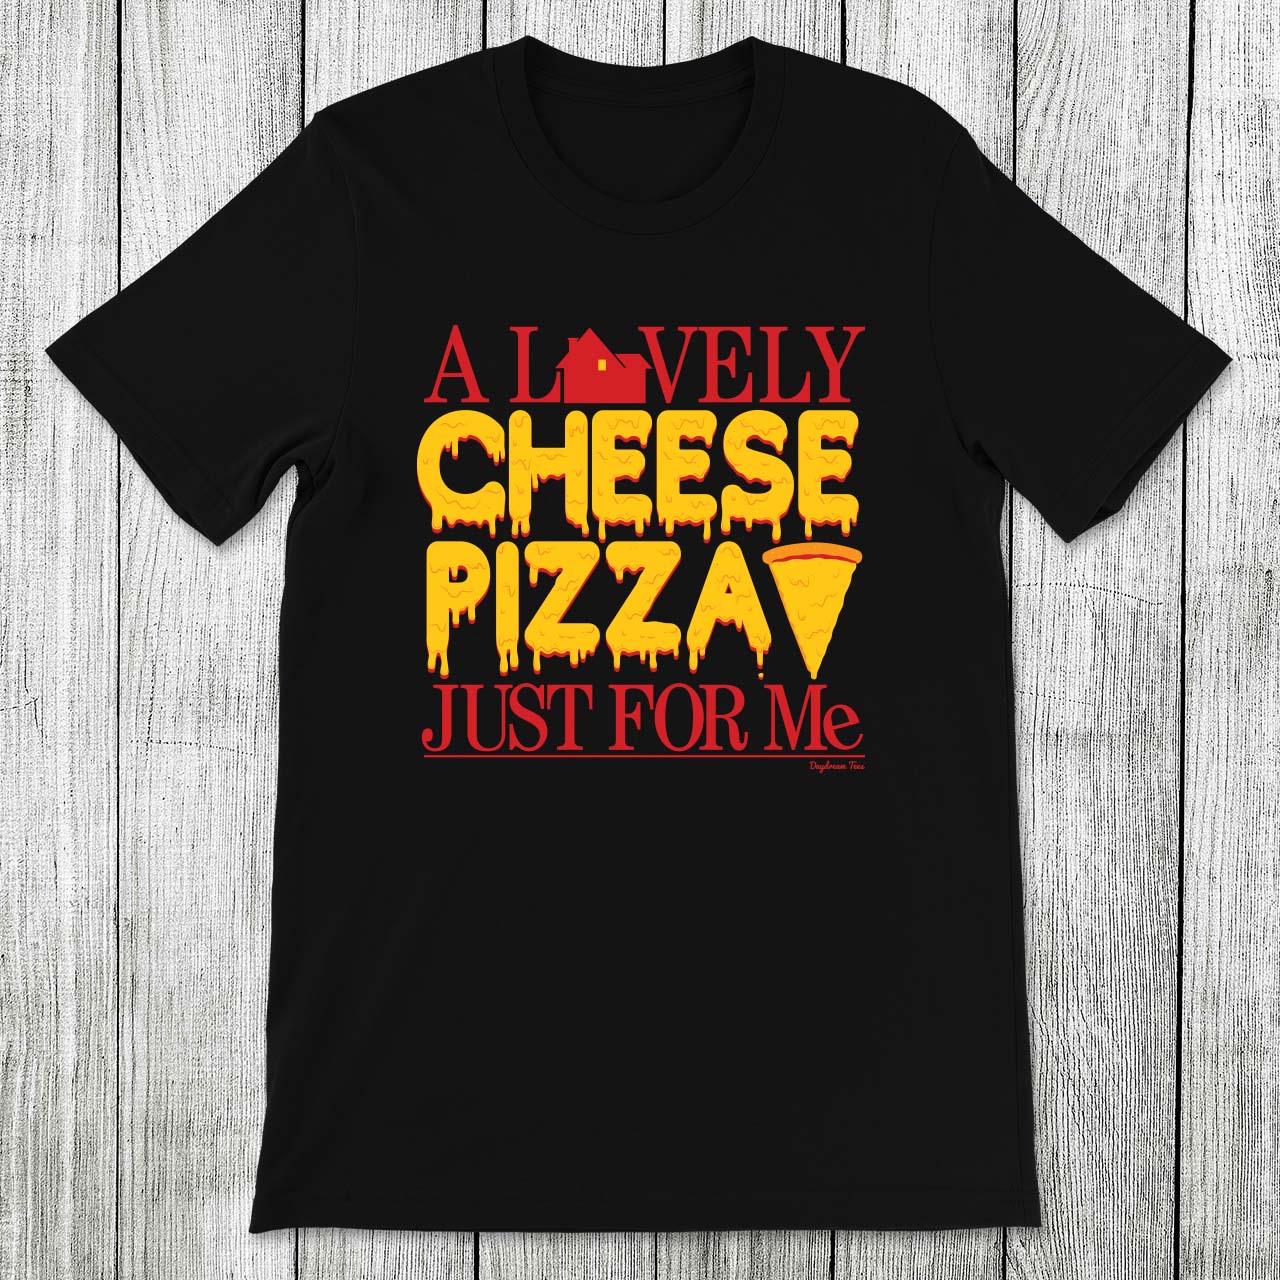 Daydream Tees Cheese Pizza Just For Me